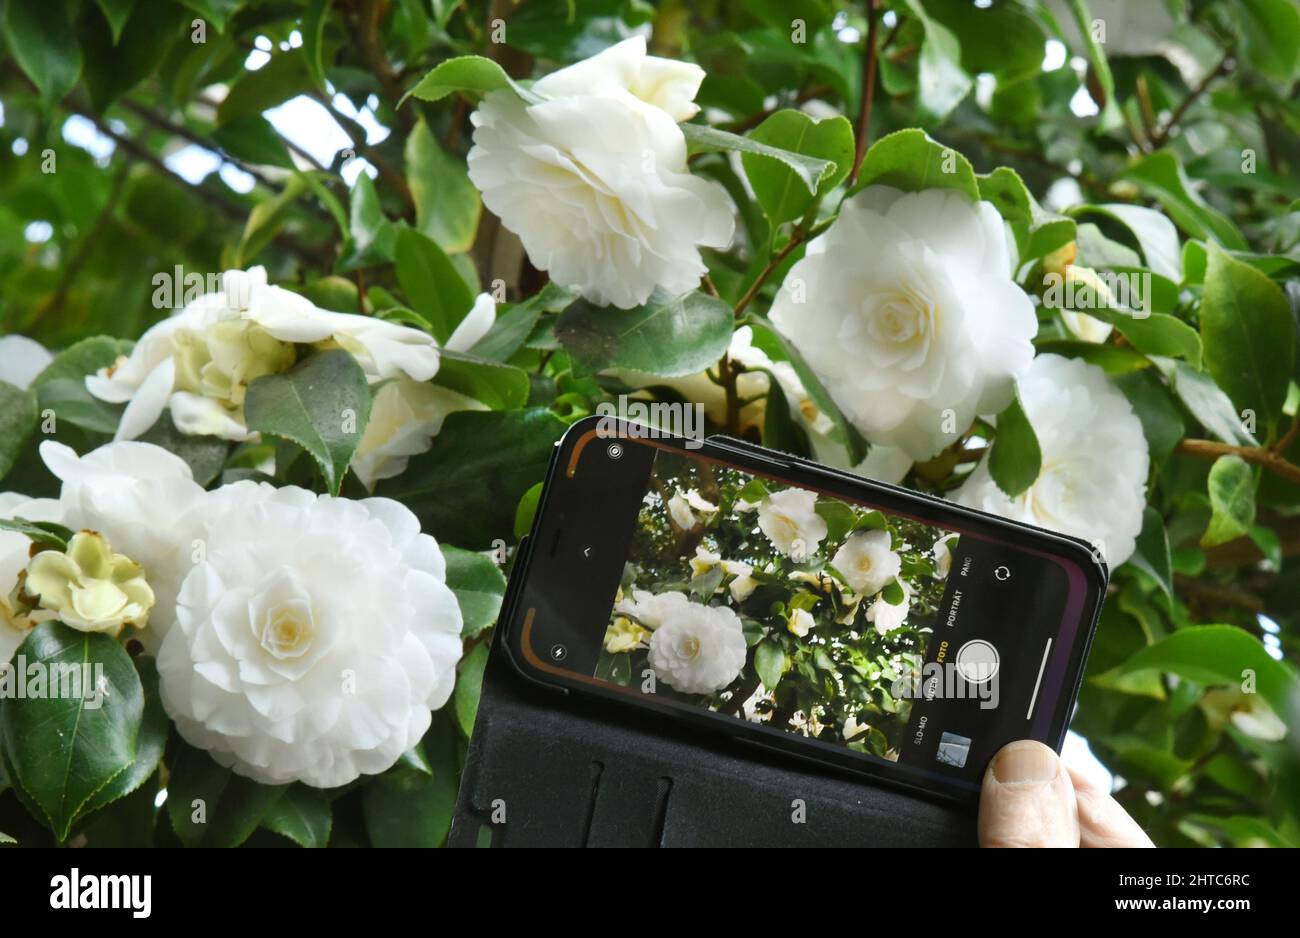 27 February 2022, Saxony, Roßwein: In the camellia house, which is looked after by members of the Heimatverein Roßwein e.V., a visitor uses his cell phone to take a photo of the white flowering splendor of the over 200-year-old camellia 'Alba plena'. The 6.50-meter-high plant, also known as the Tea Rose of Winter with its double flowers up to 10 centimeters in size, is said to have been planted in the 18th century by Count von Einsiedel at Gersdorf near Roßwein. The botanical rarity is the second oldest north of the Alps in Europe after the famous Pillnitz camellia and can be seen with other d Stock Photo